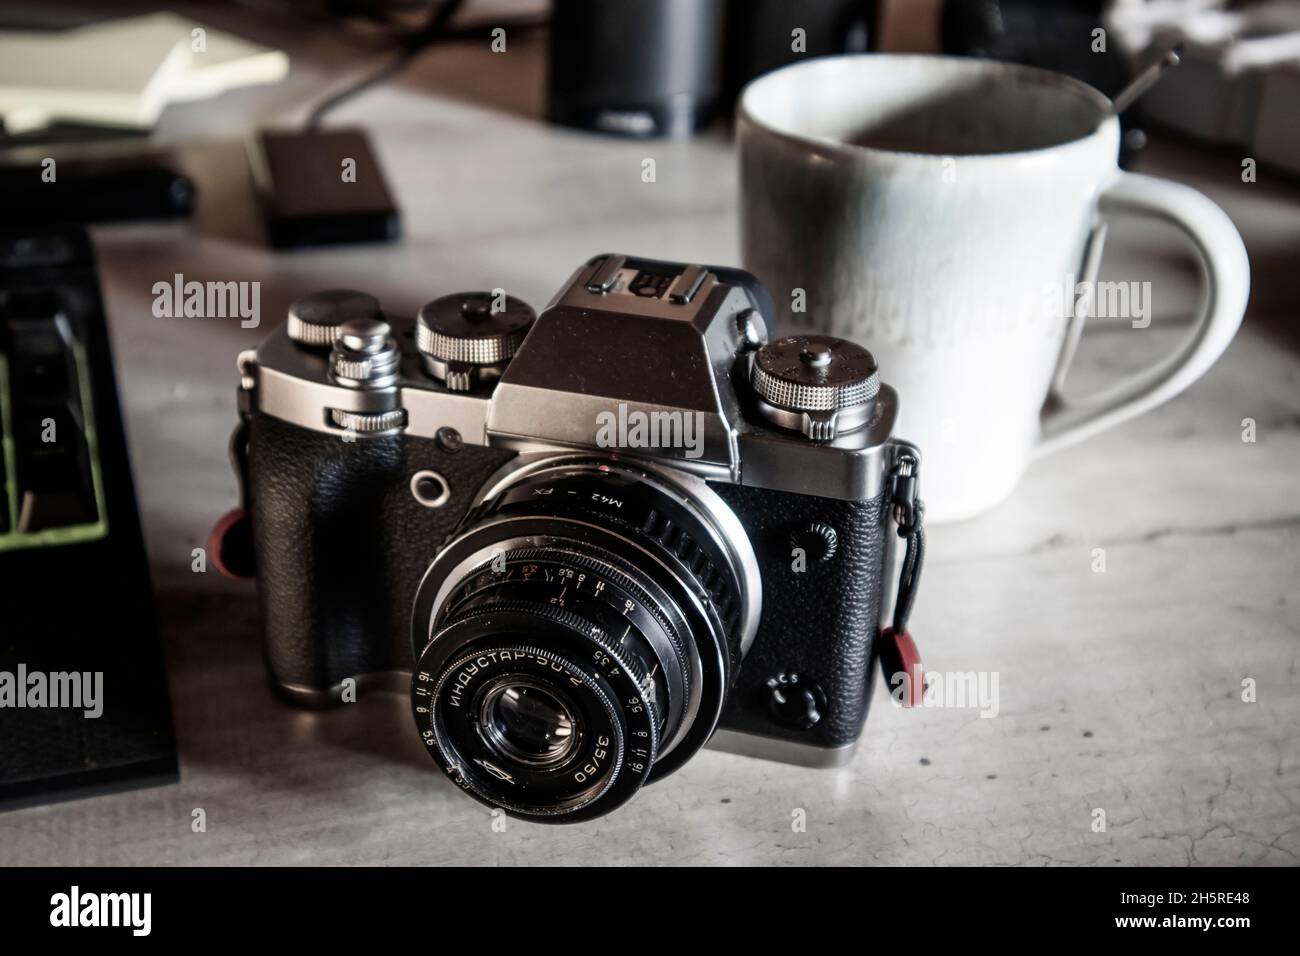 Vintage old 50mm USSR lens on a silver and black hybrid camera body on a grey desk top with coffee mug Stock Photo